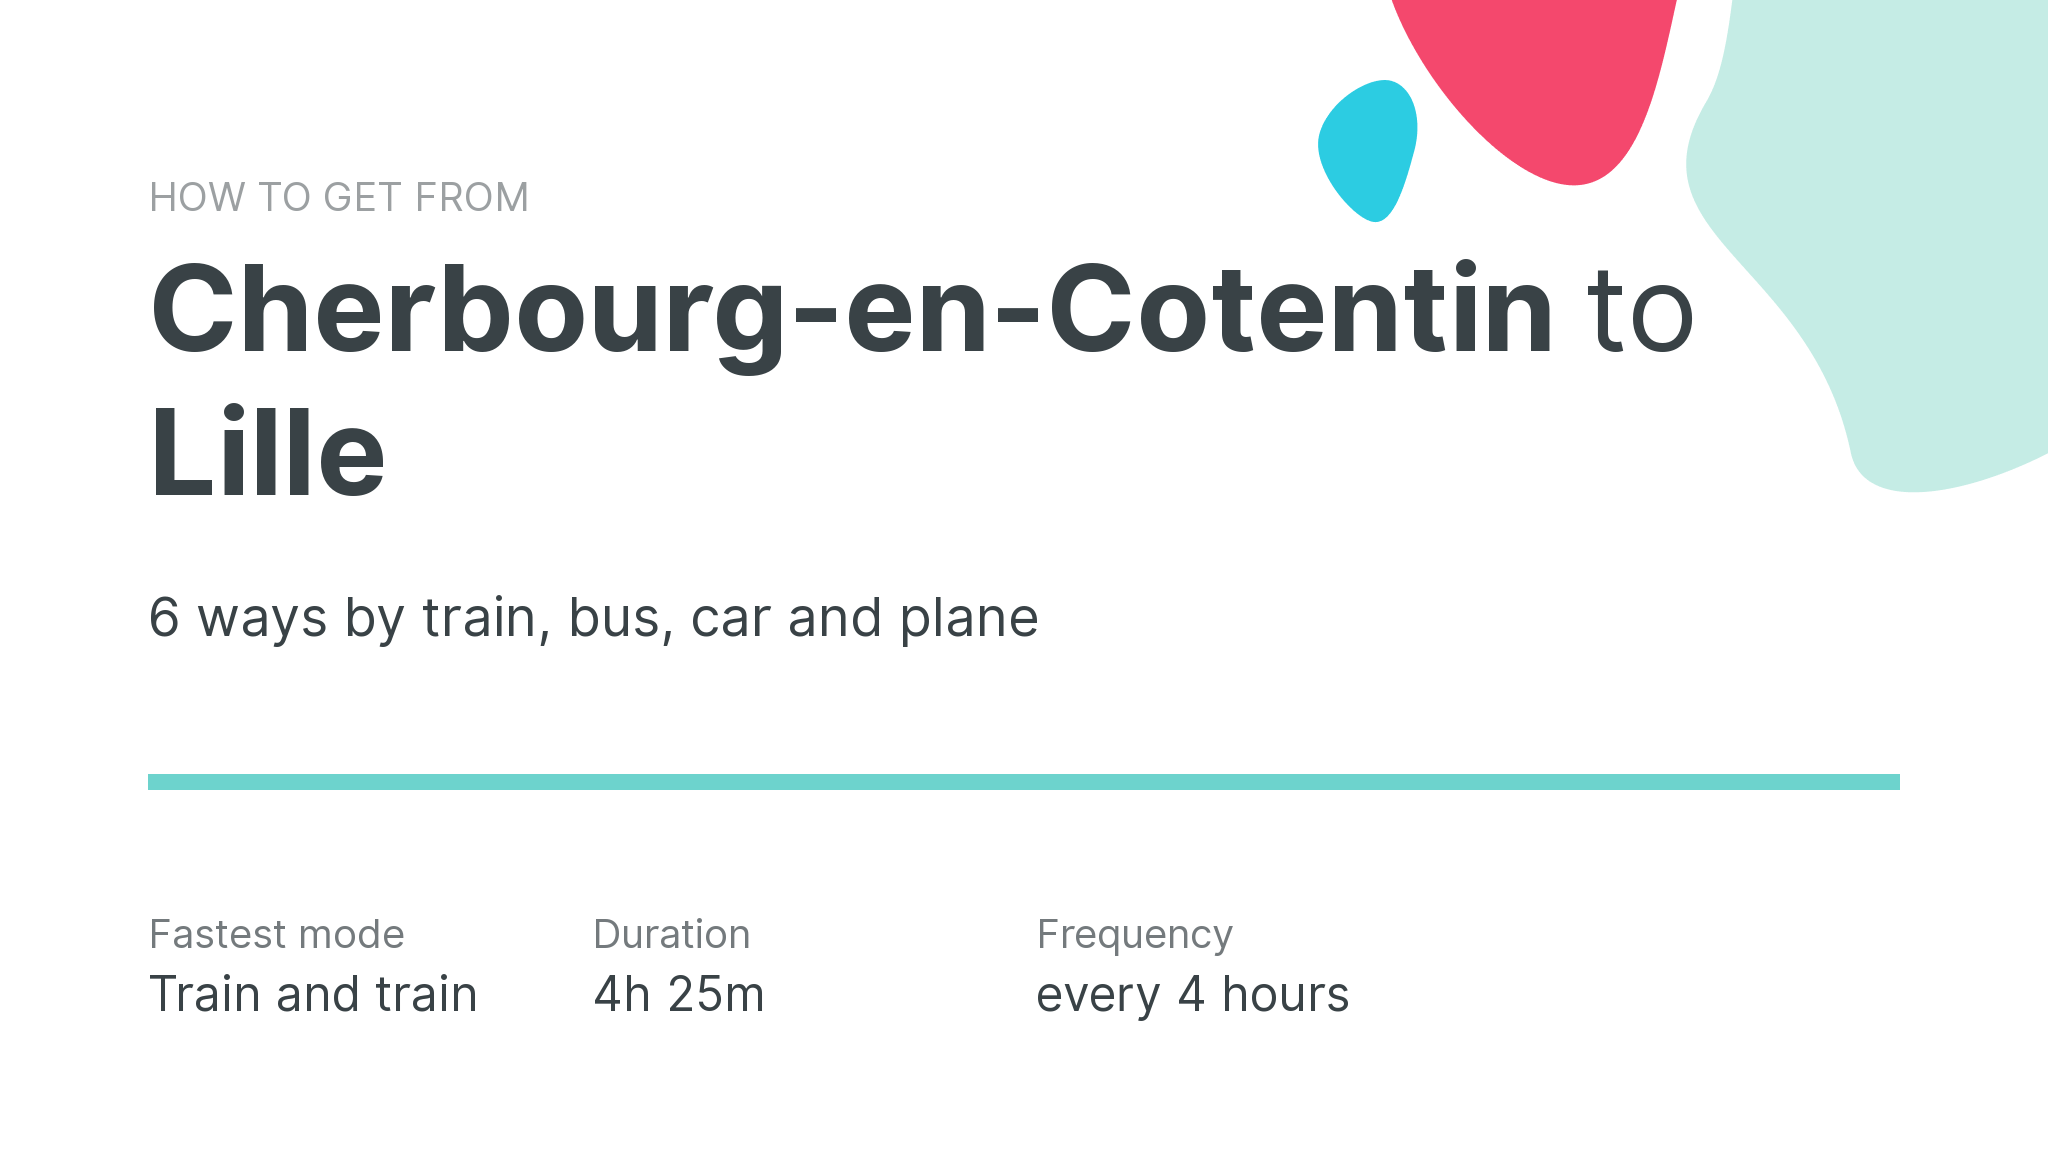 How do I get from Cherbourg-en-Cotentin to Lille